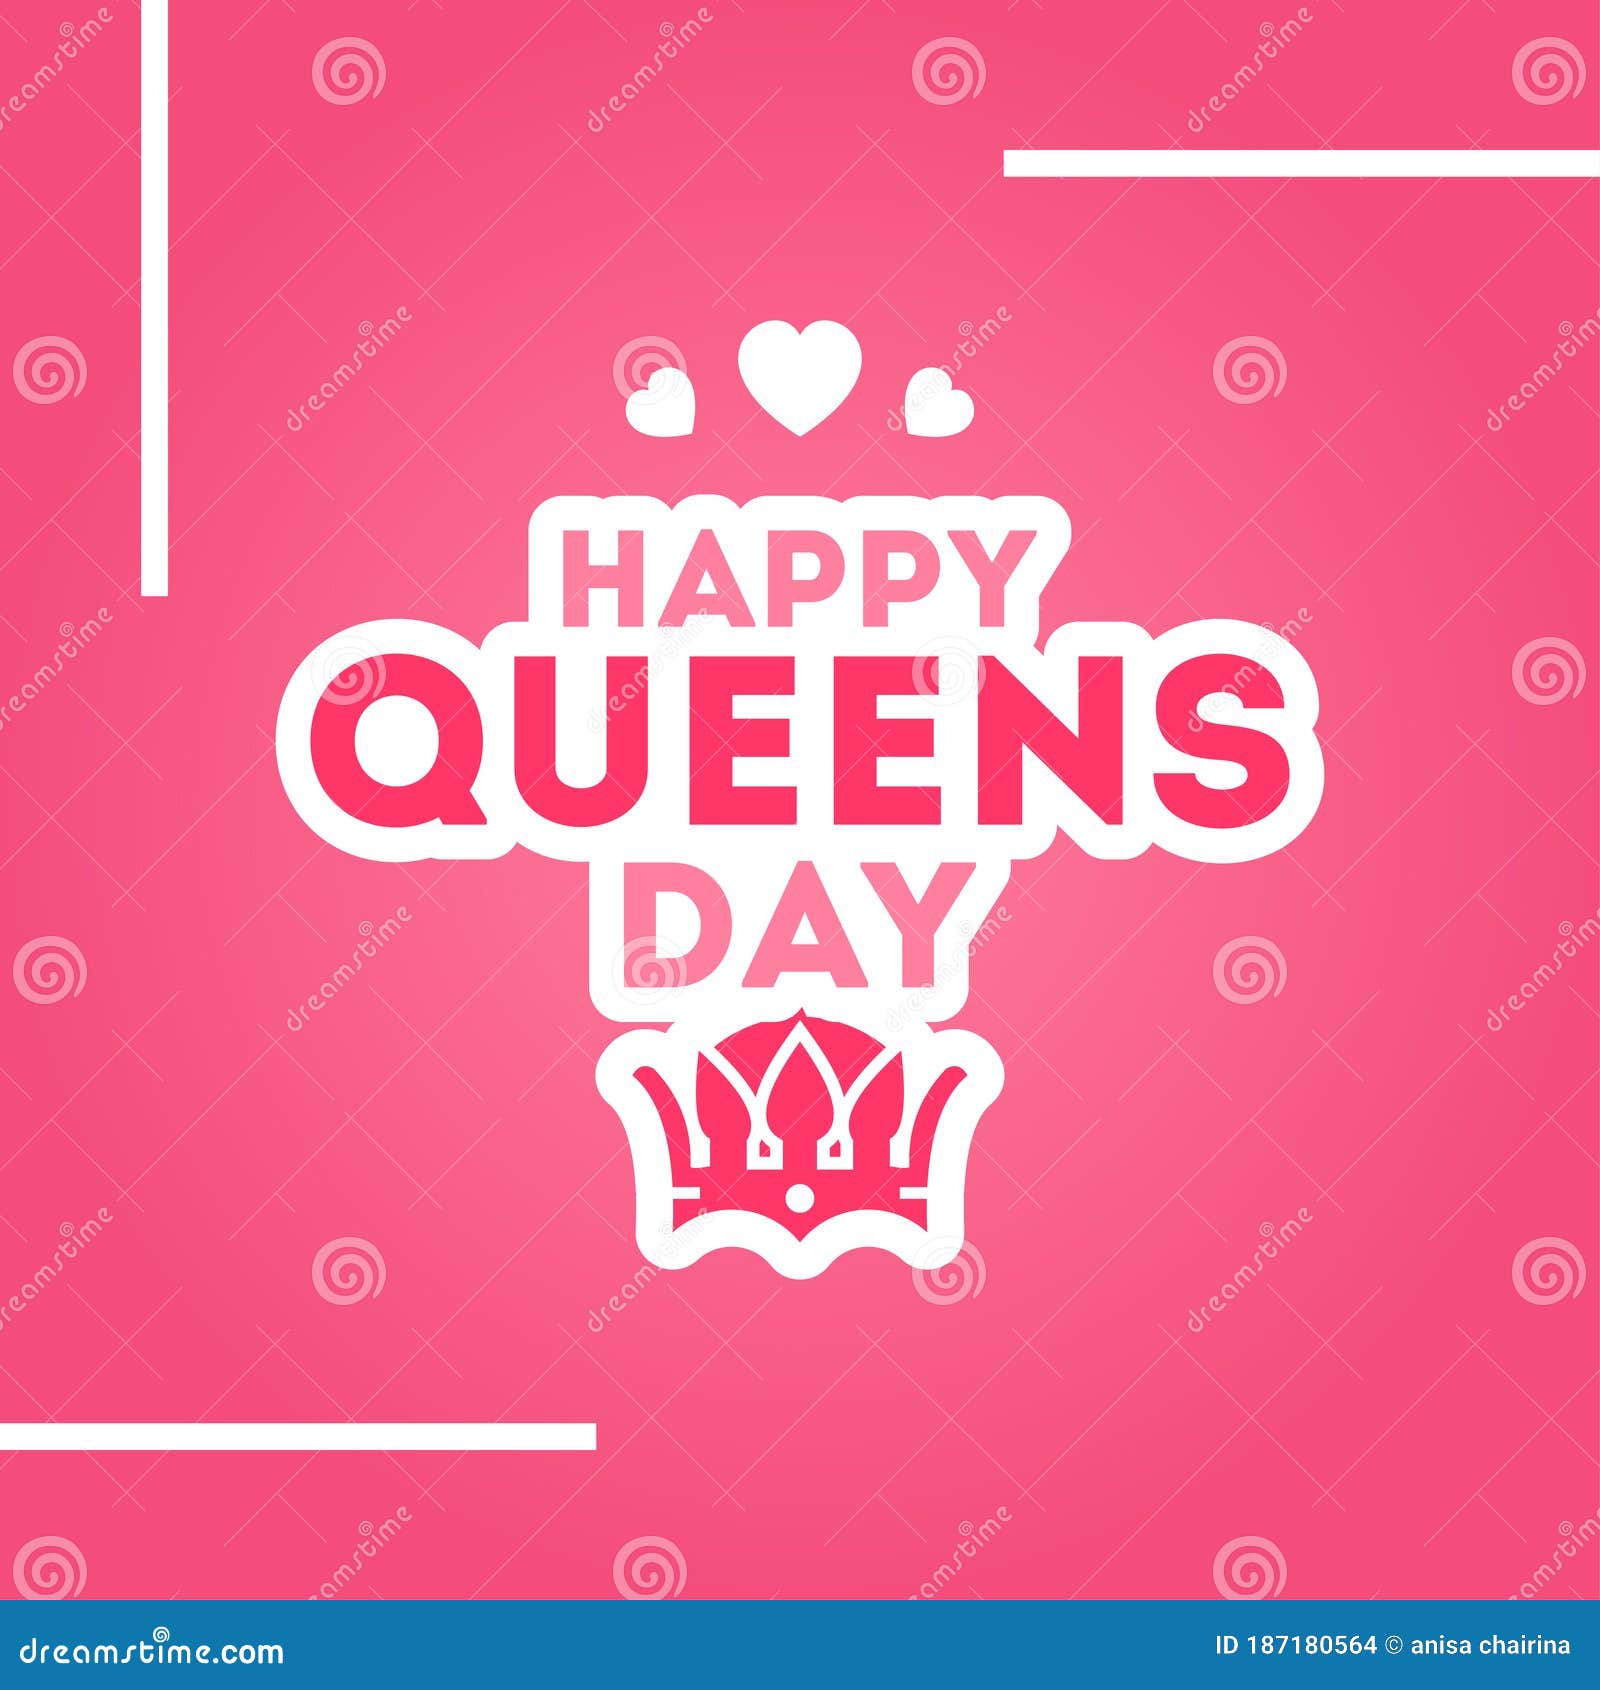 Happy Queens Day Vector Design Illustration for Celebrate Moment Stock